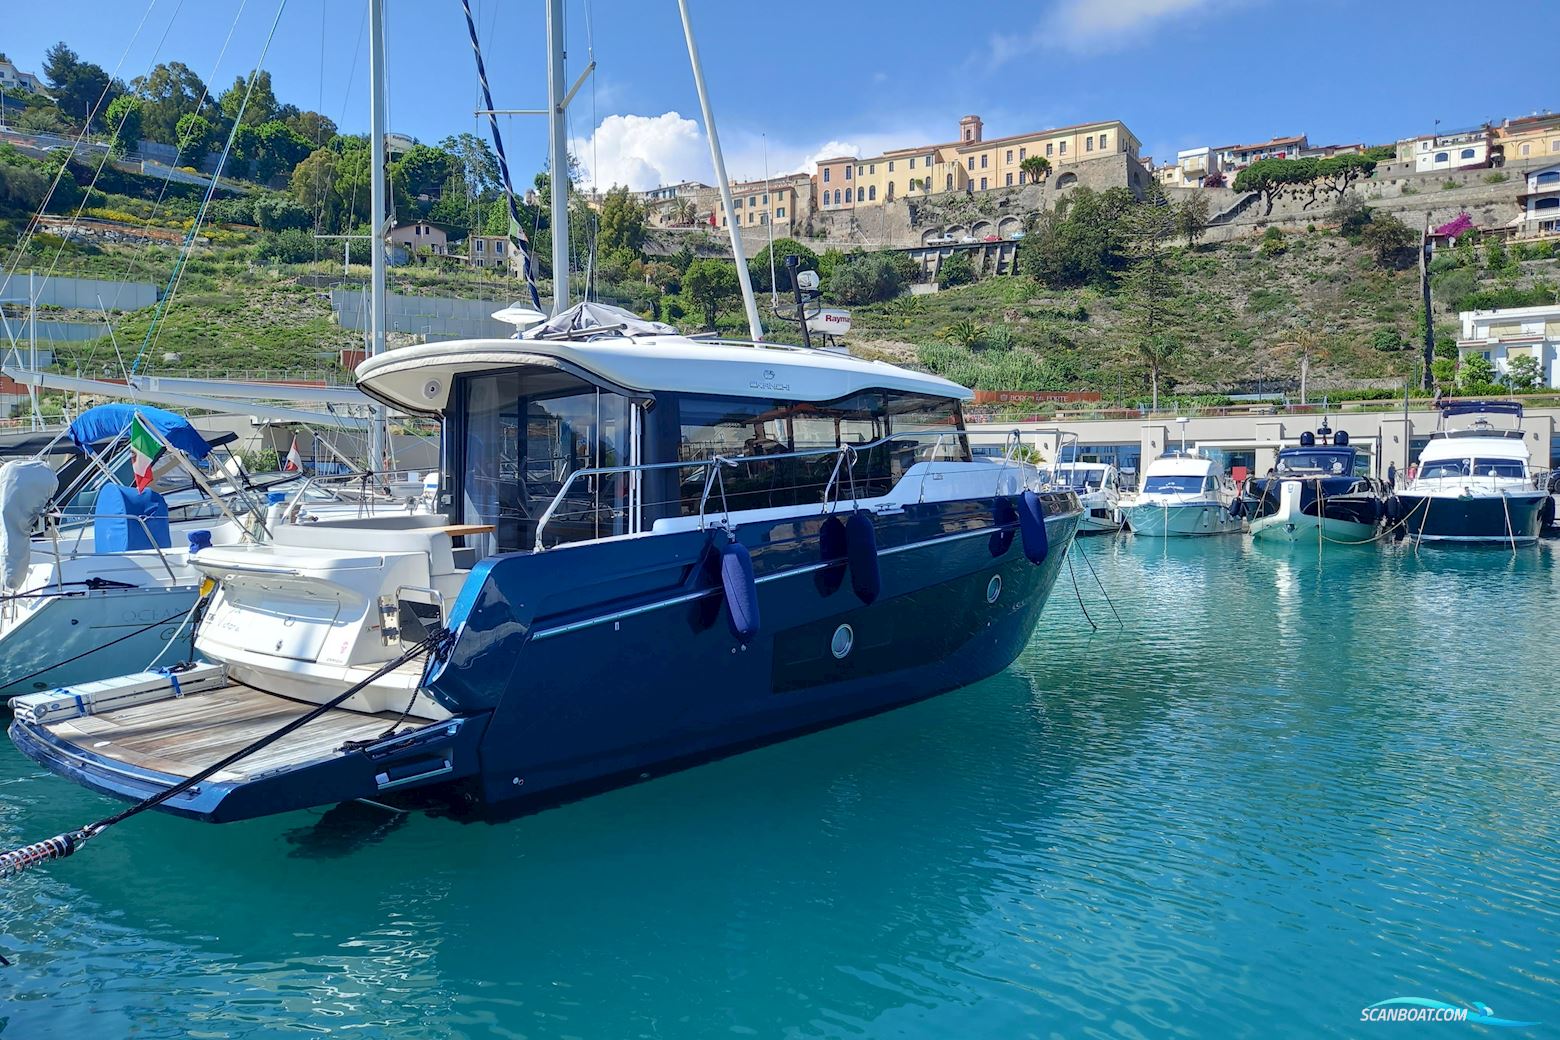 Cranchi T36 Crossover Motor boat 2019, with Volvo Penta engine, France